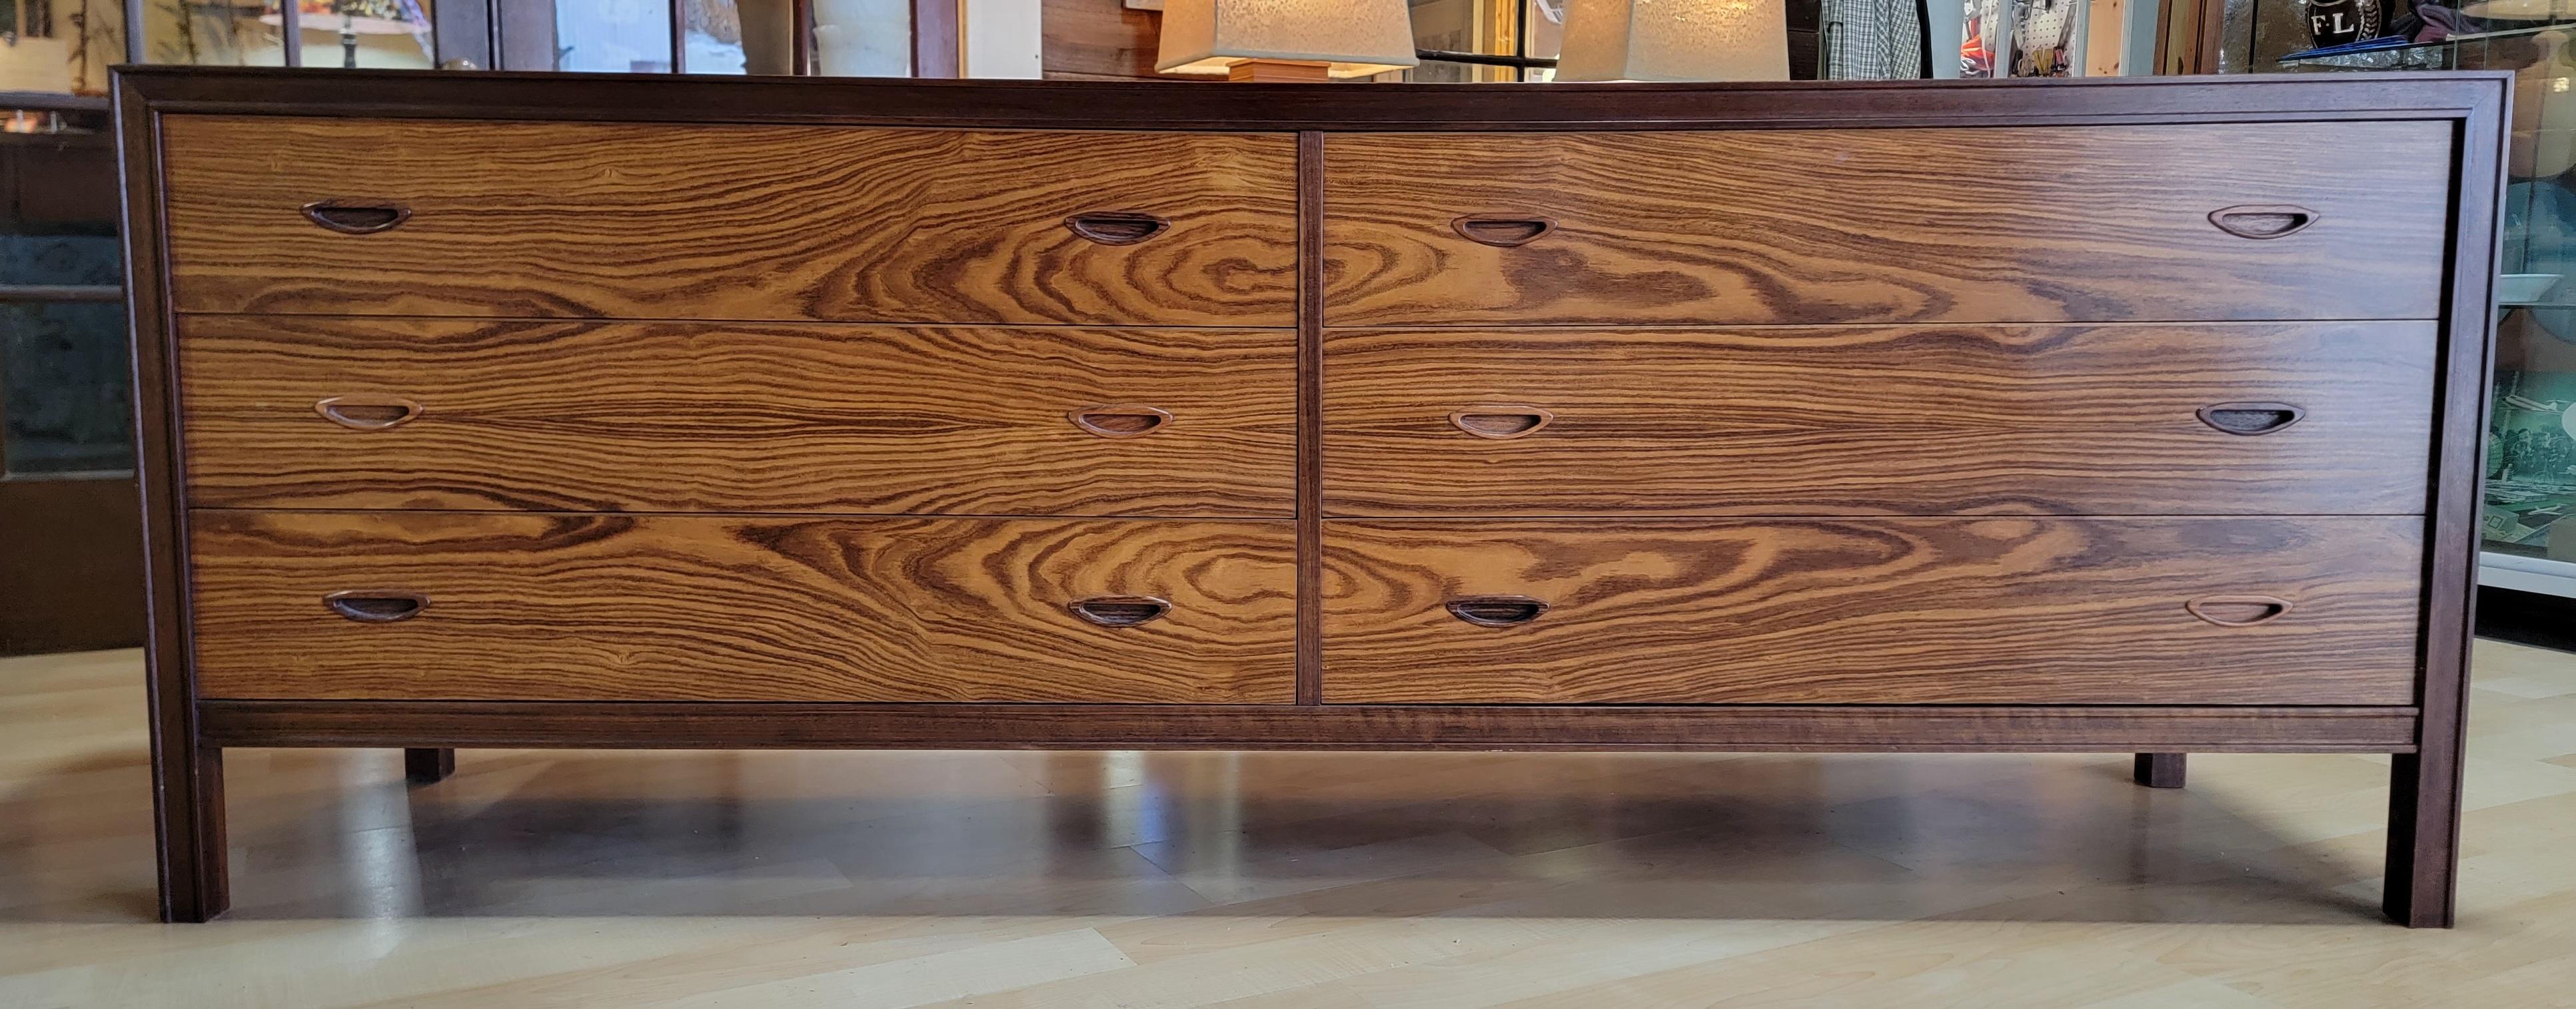 Danish Modern Rosewood Double Dresser In Good Condition For Sale In Fulton, CA